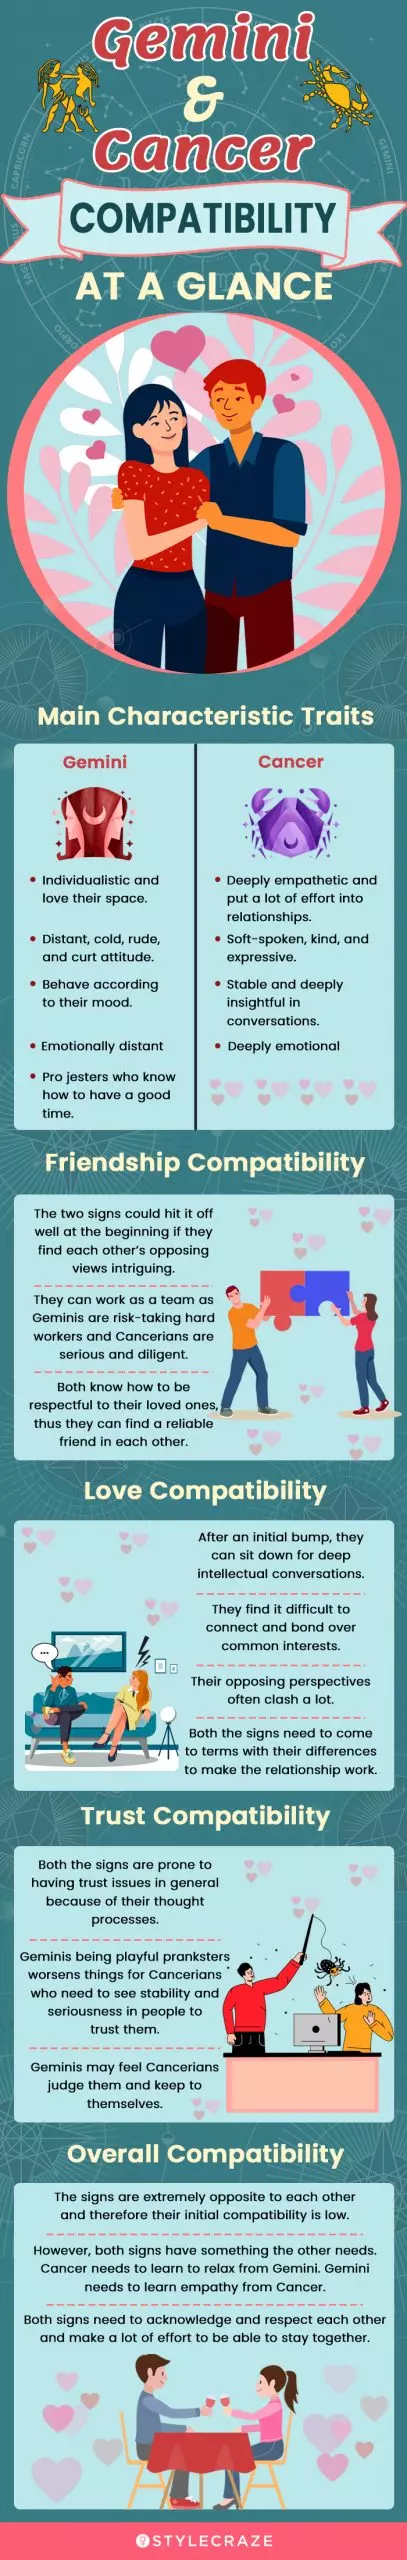 gemini and cancer compatibility at a glance (infographic)